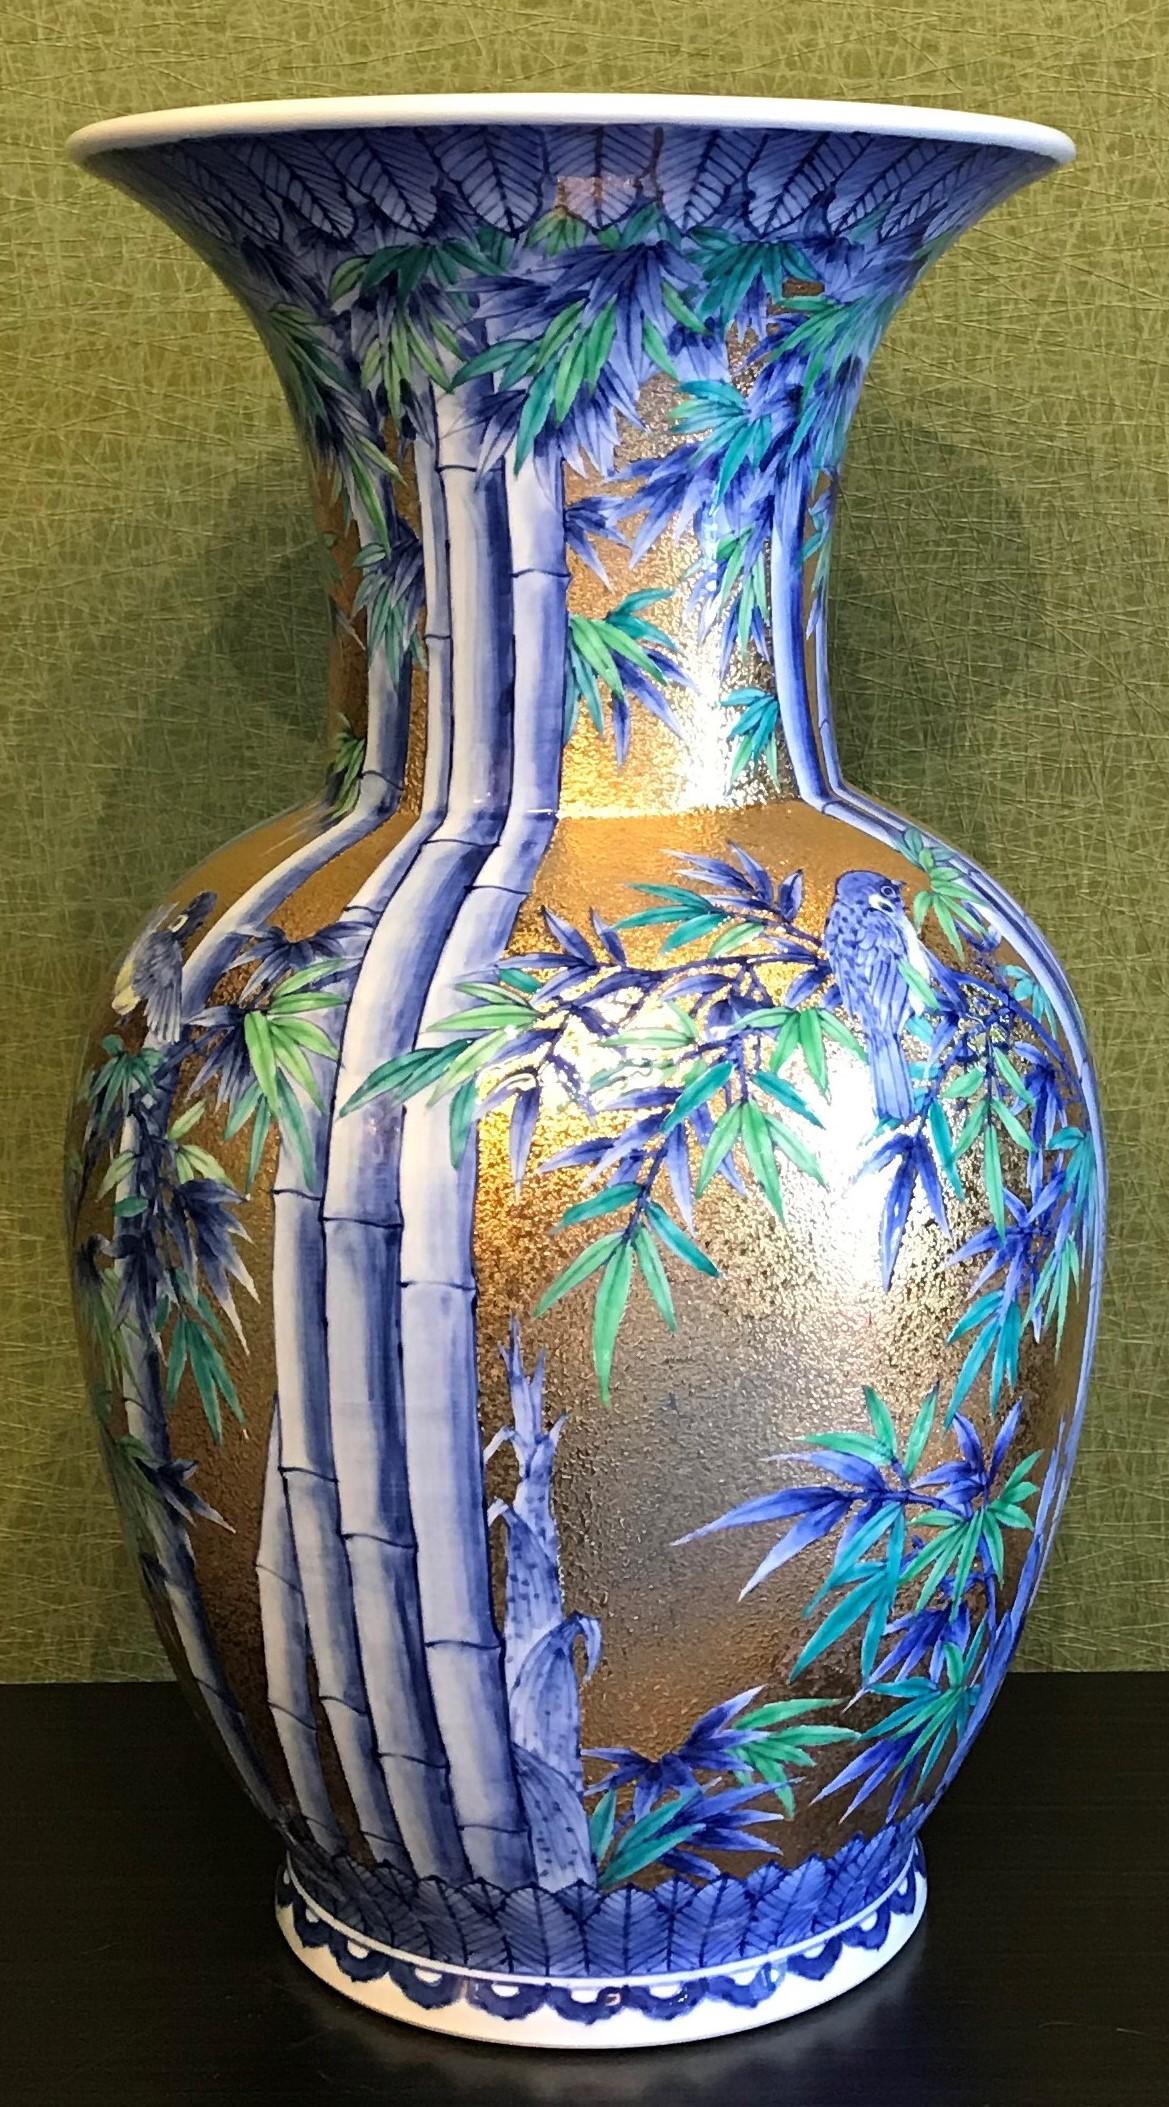 Extraordinary very large signed contemporary gilded porcelain vase, intricately hand painted on a stunningly shaped very large body accentuated by its extended neck and flared rim. This magnificent piece is a masterpiece by a highly acclaimed and